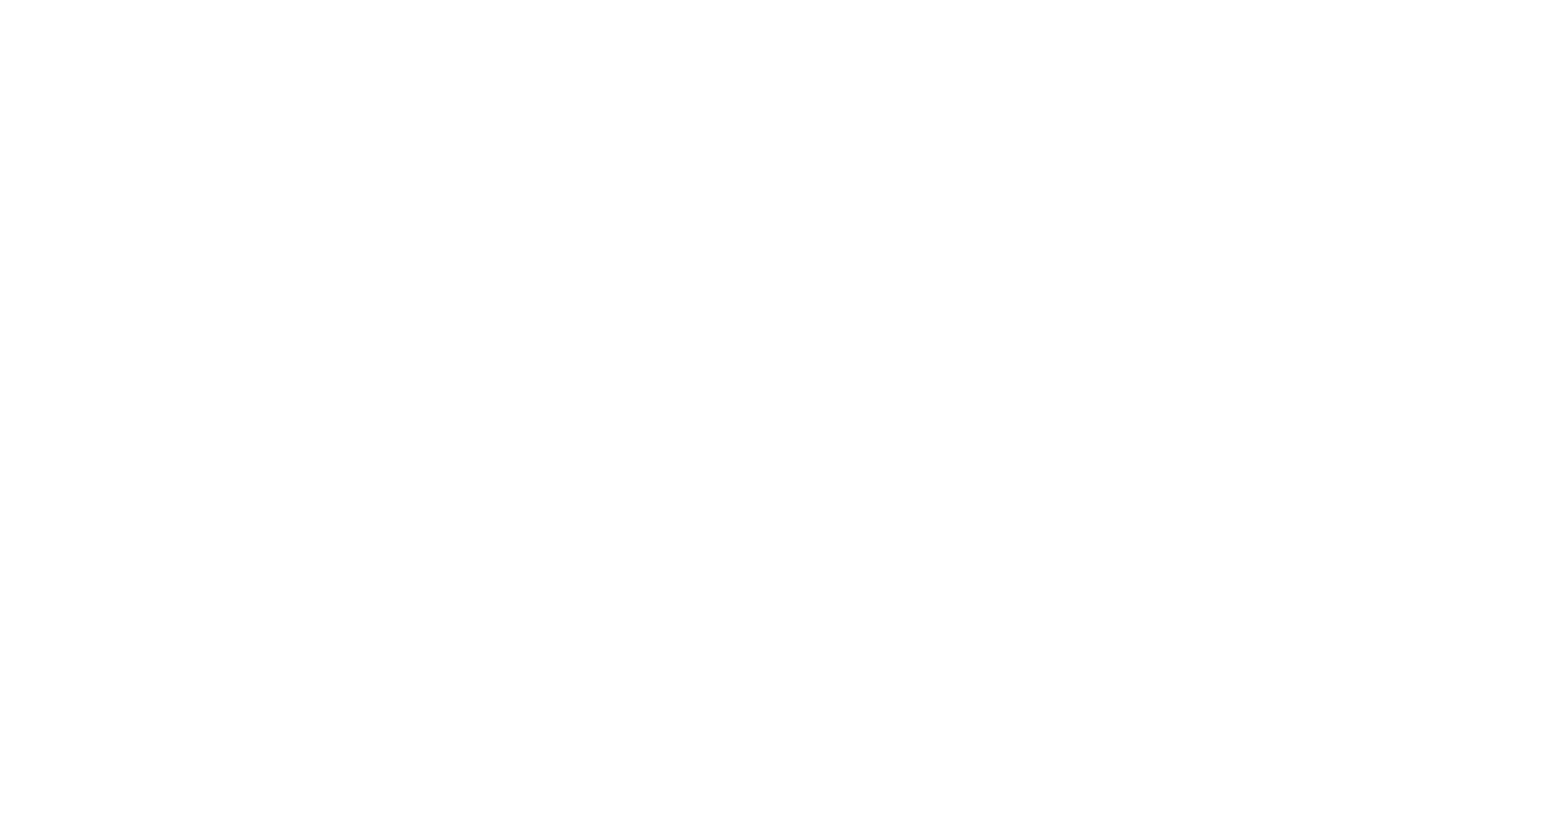 The Lee Group logo